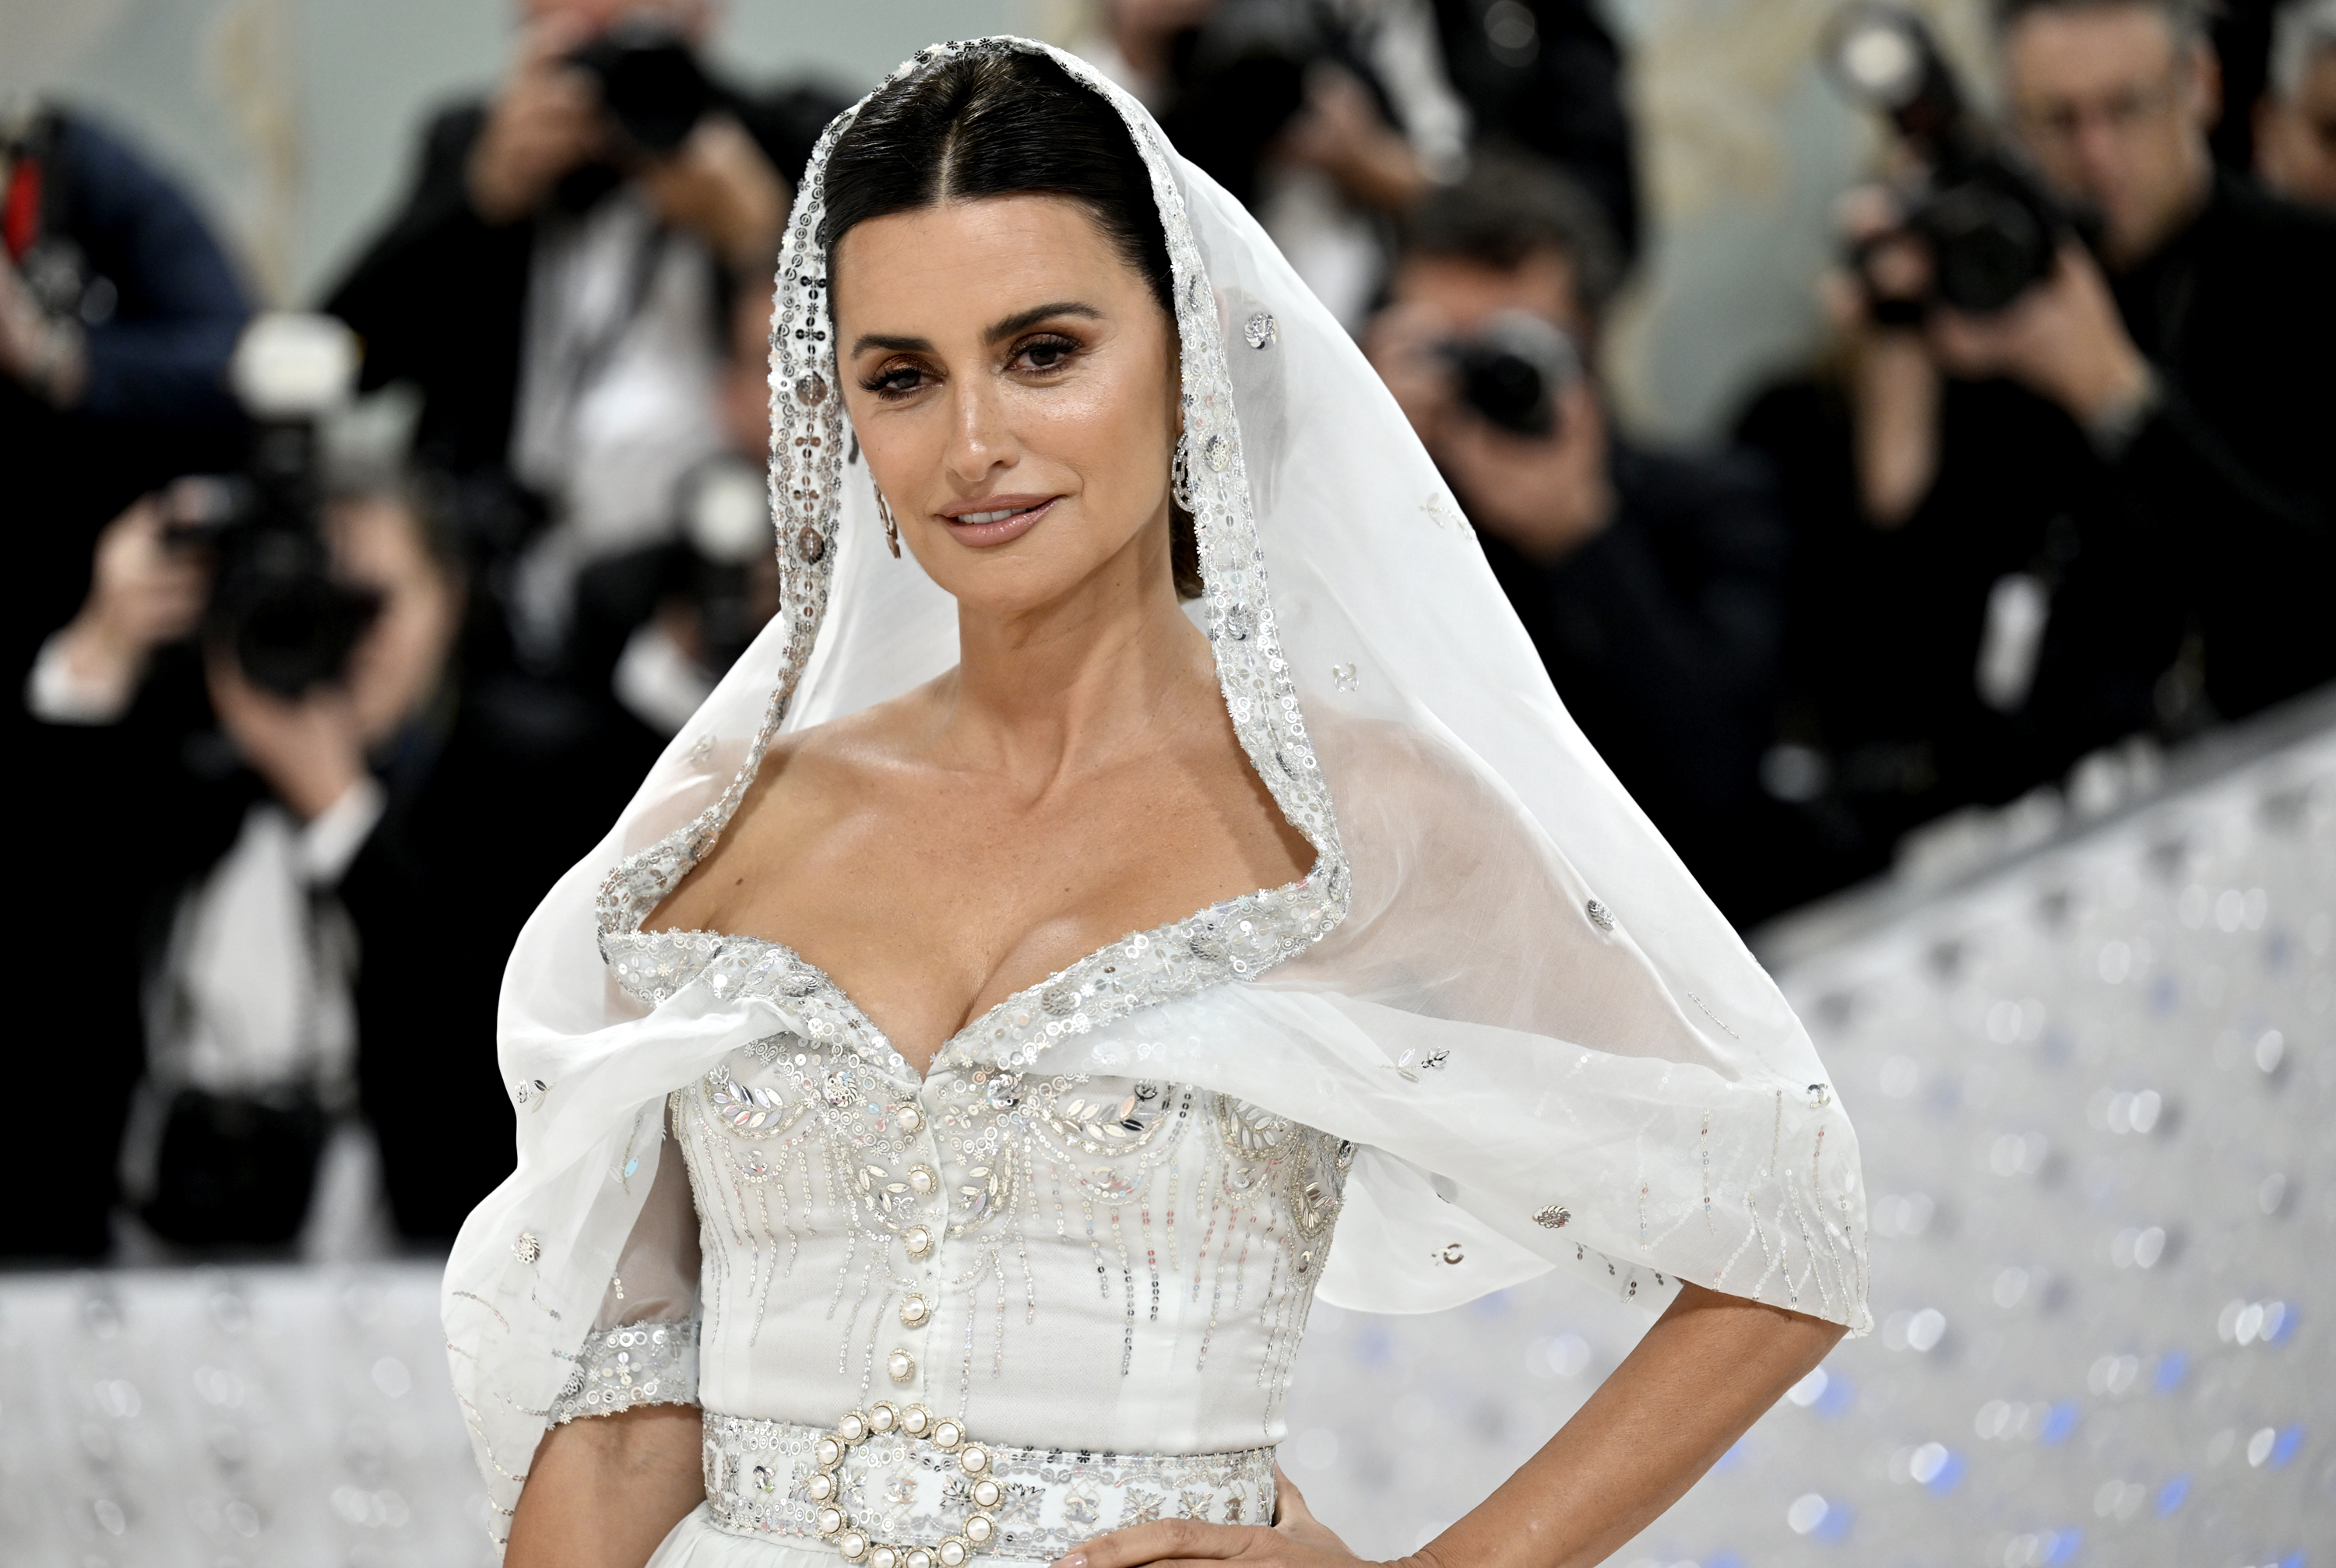 Pearls, Chanel brides, and sustainability ruled the Met Gala 2023 carpet